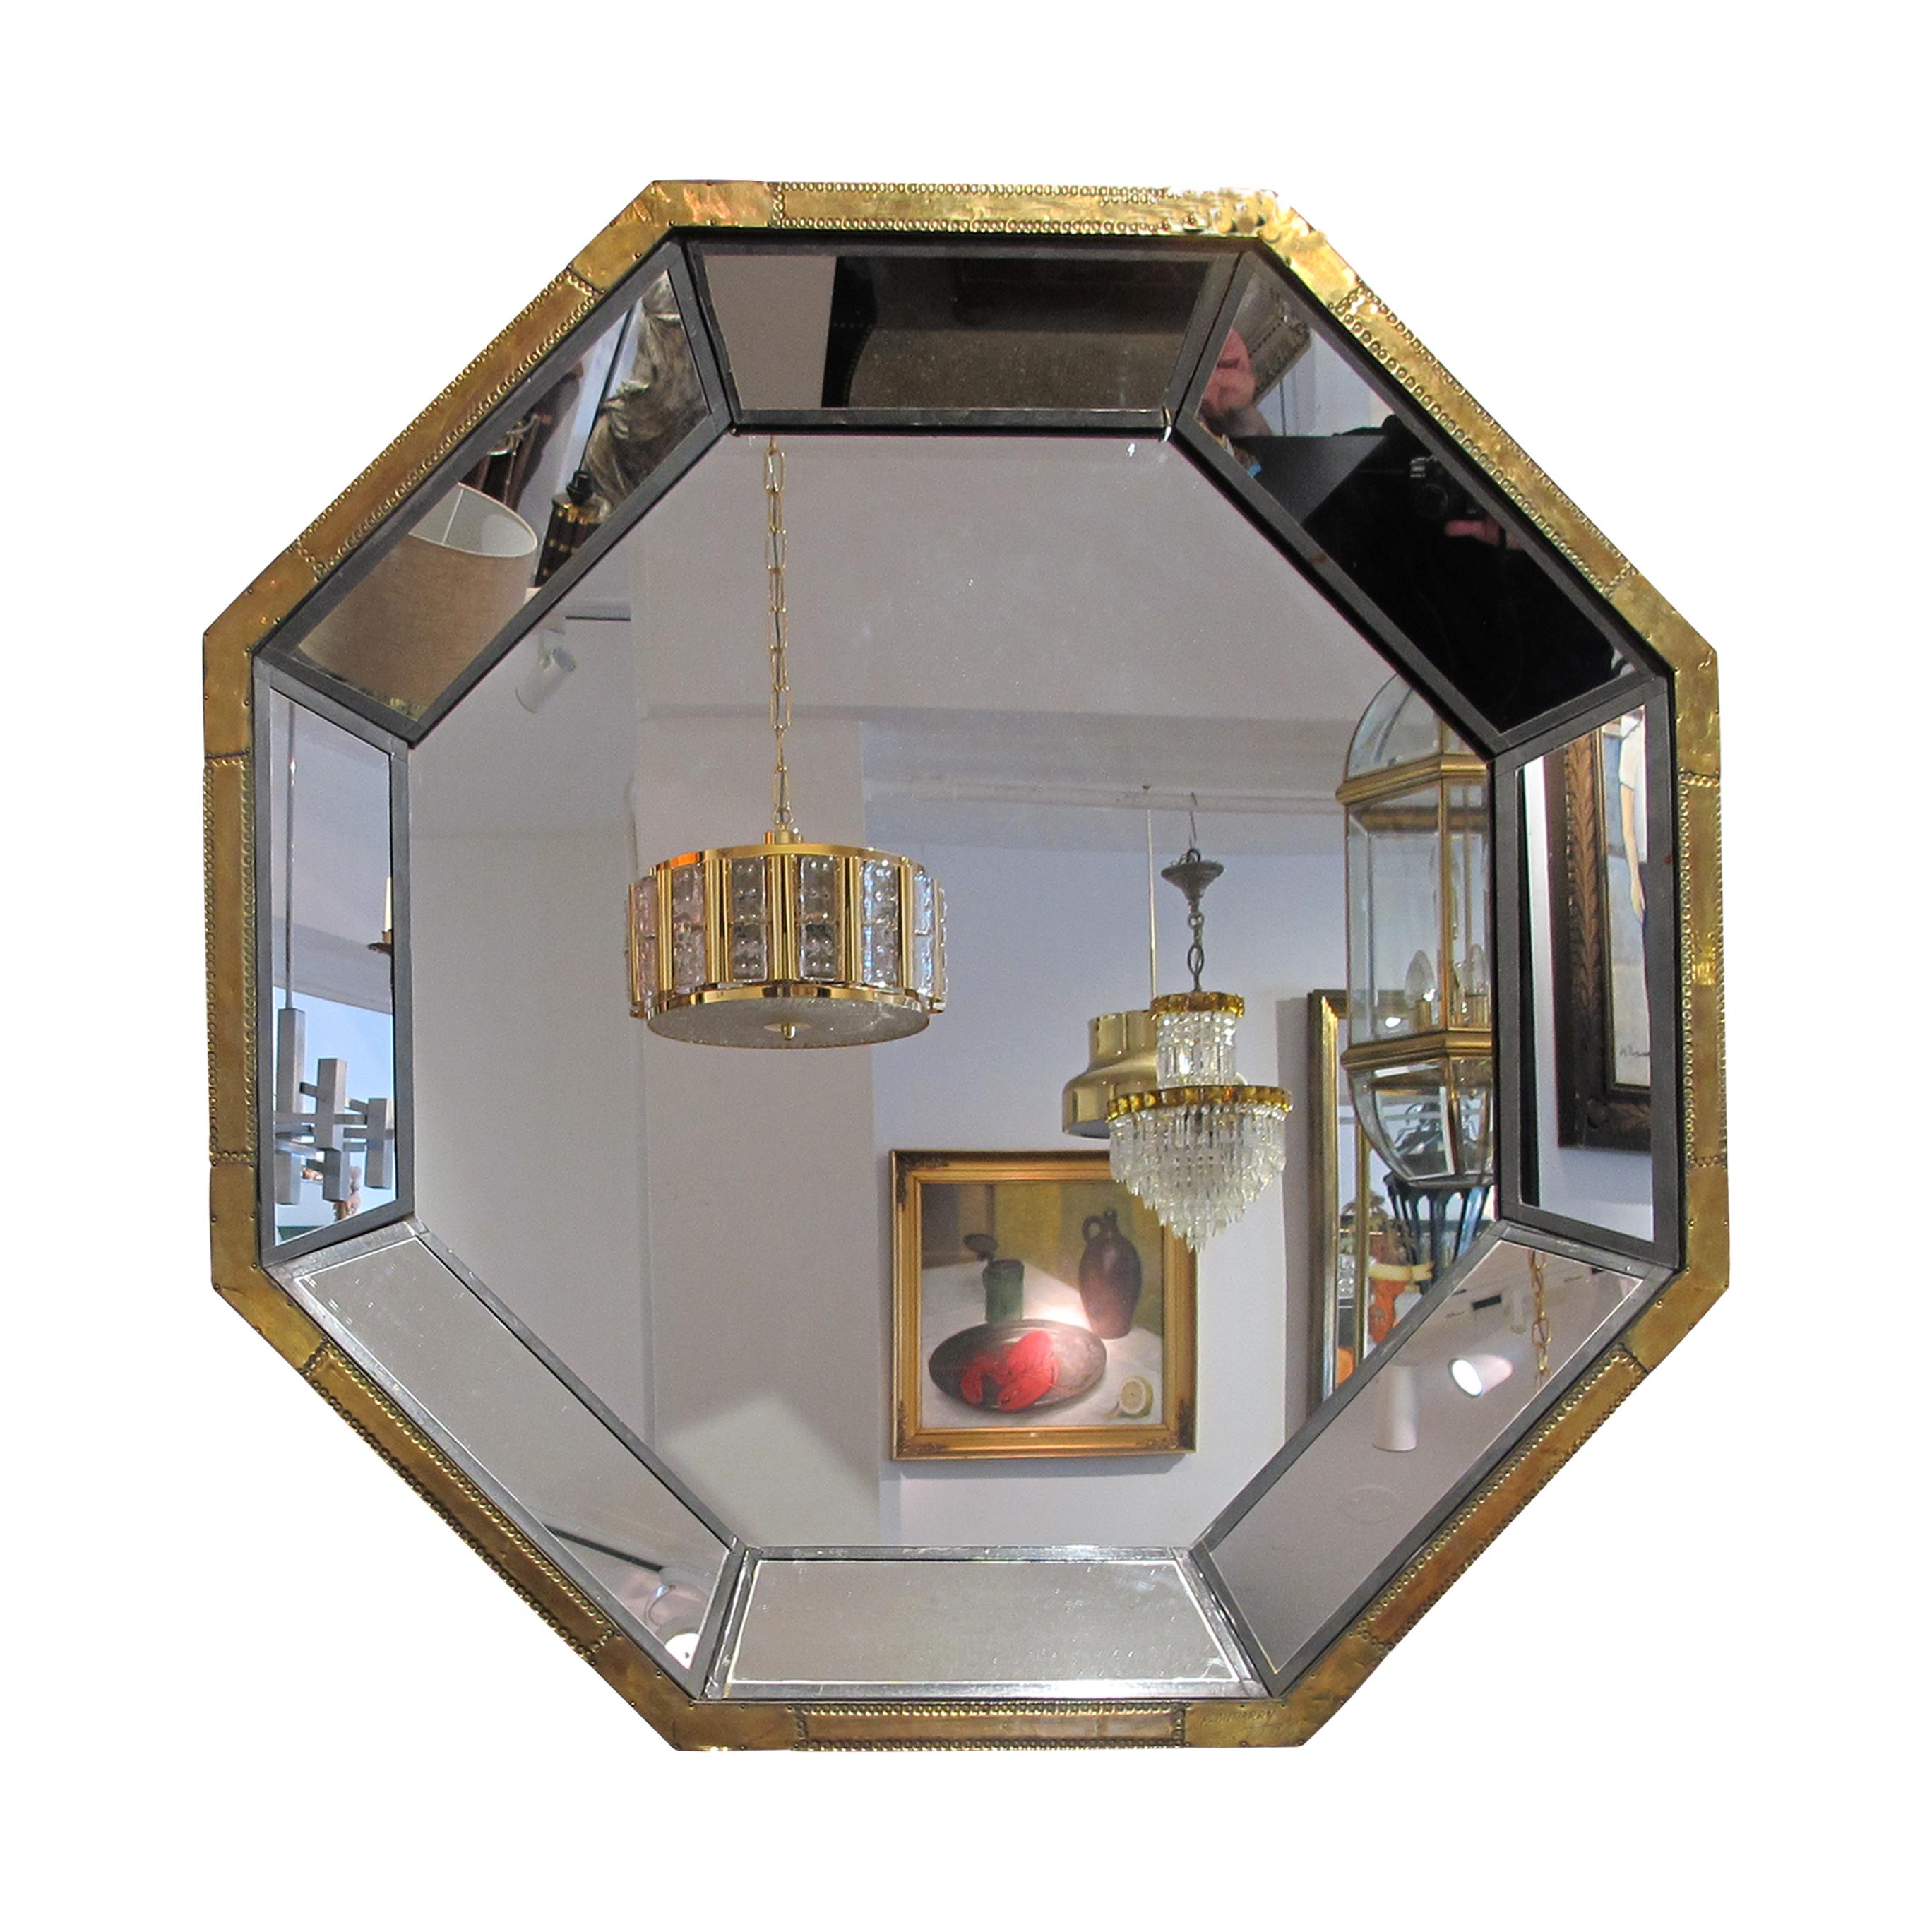 A beautiful mirror where the brass cladding lends a touch of opulence, adding a warm and luxurious glow to any space. Each section of the mirror is thoughtfully designed and skilfully arranged to create a captivating visual effect. The segmented